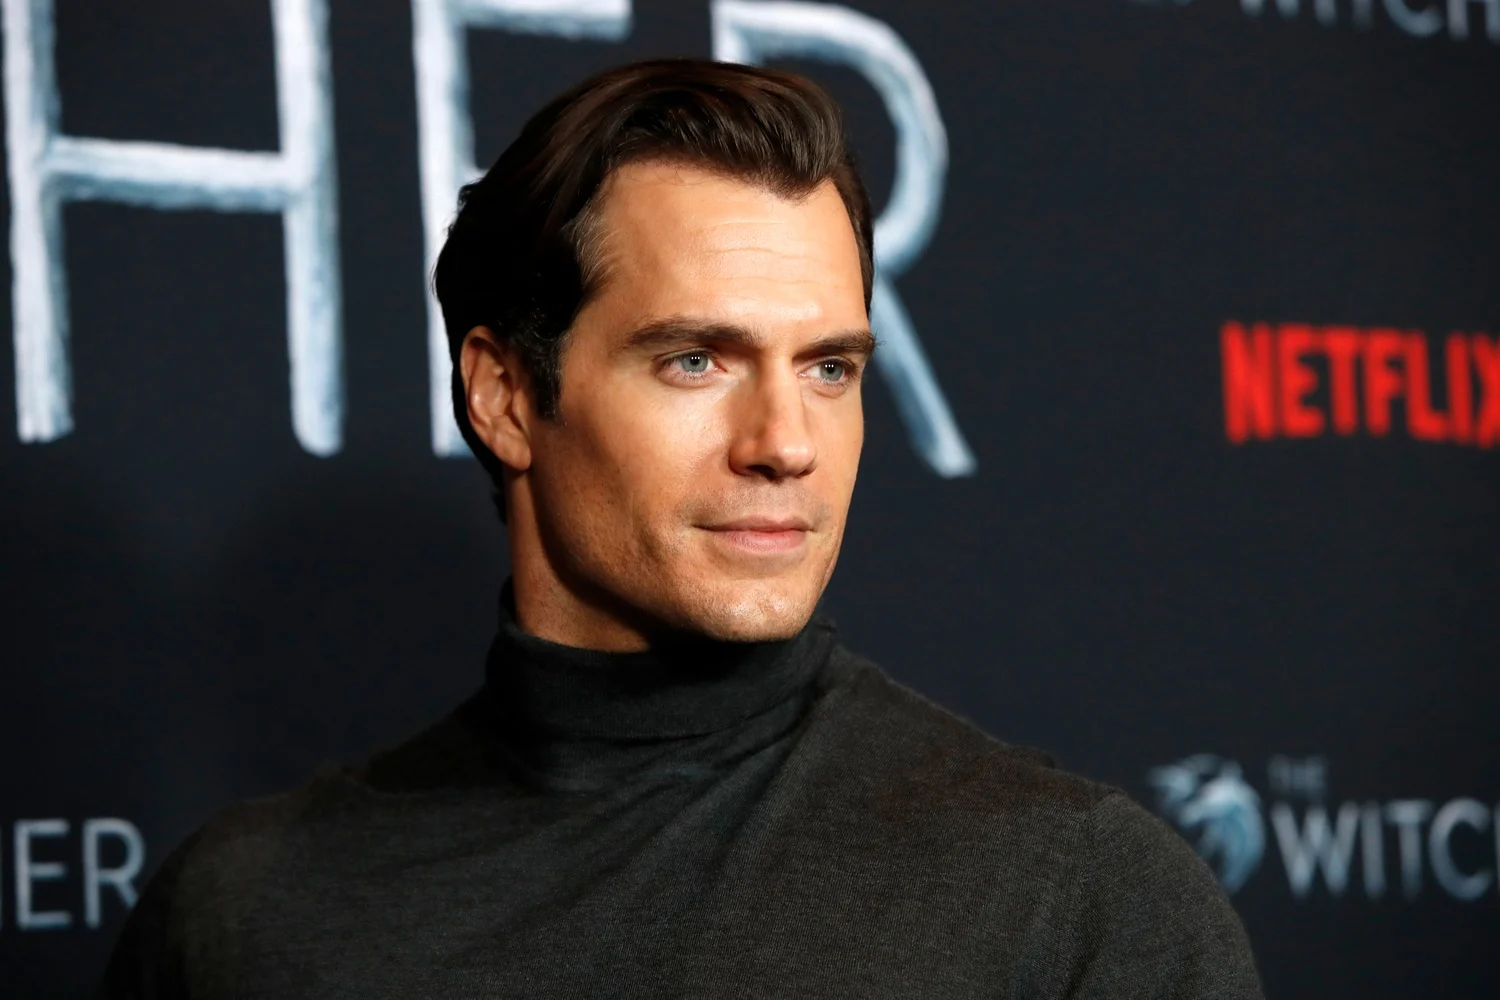 Henry Cavill from The Witcher